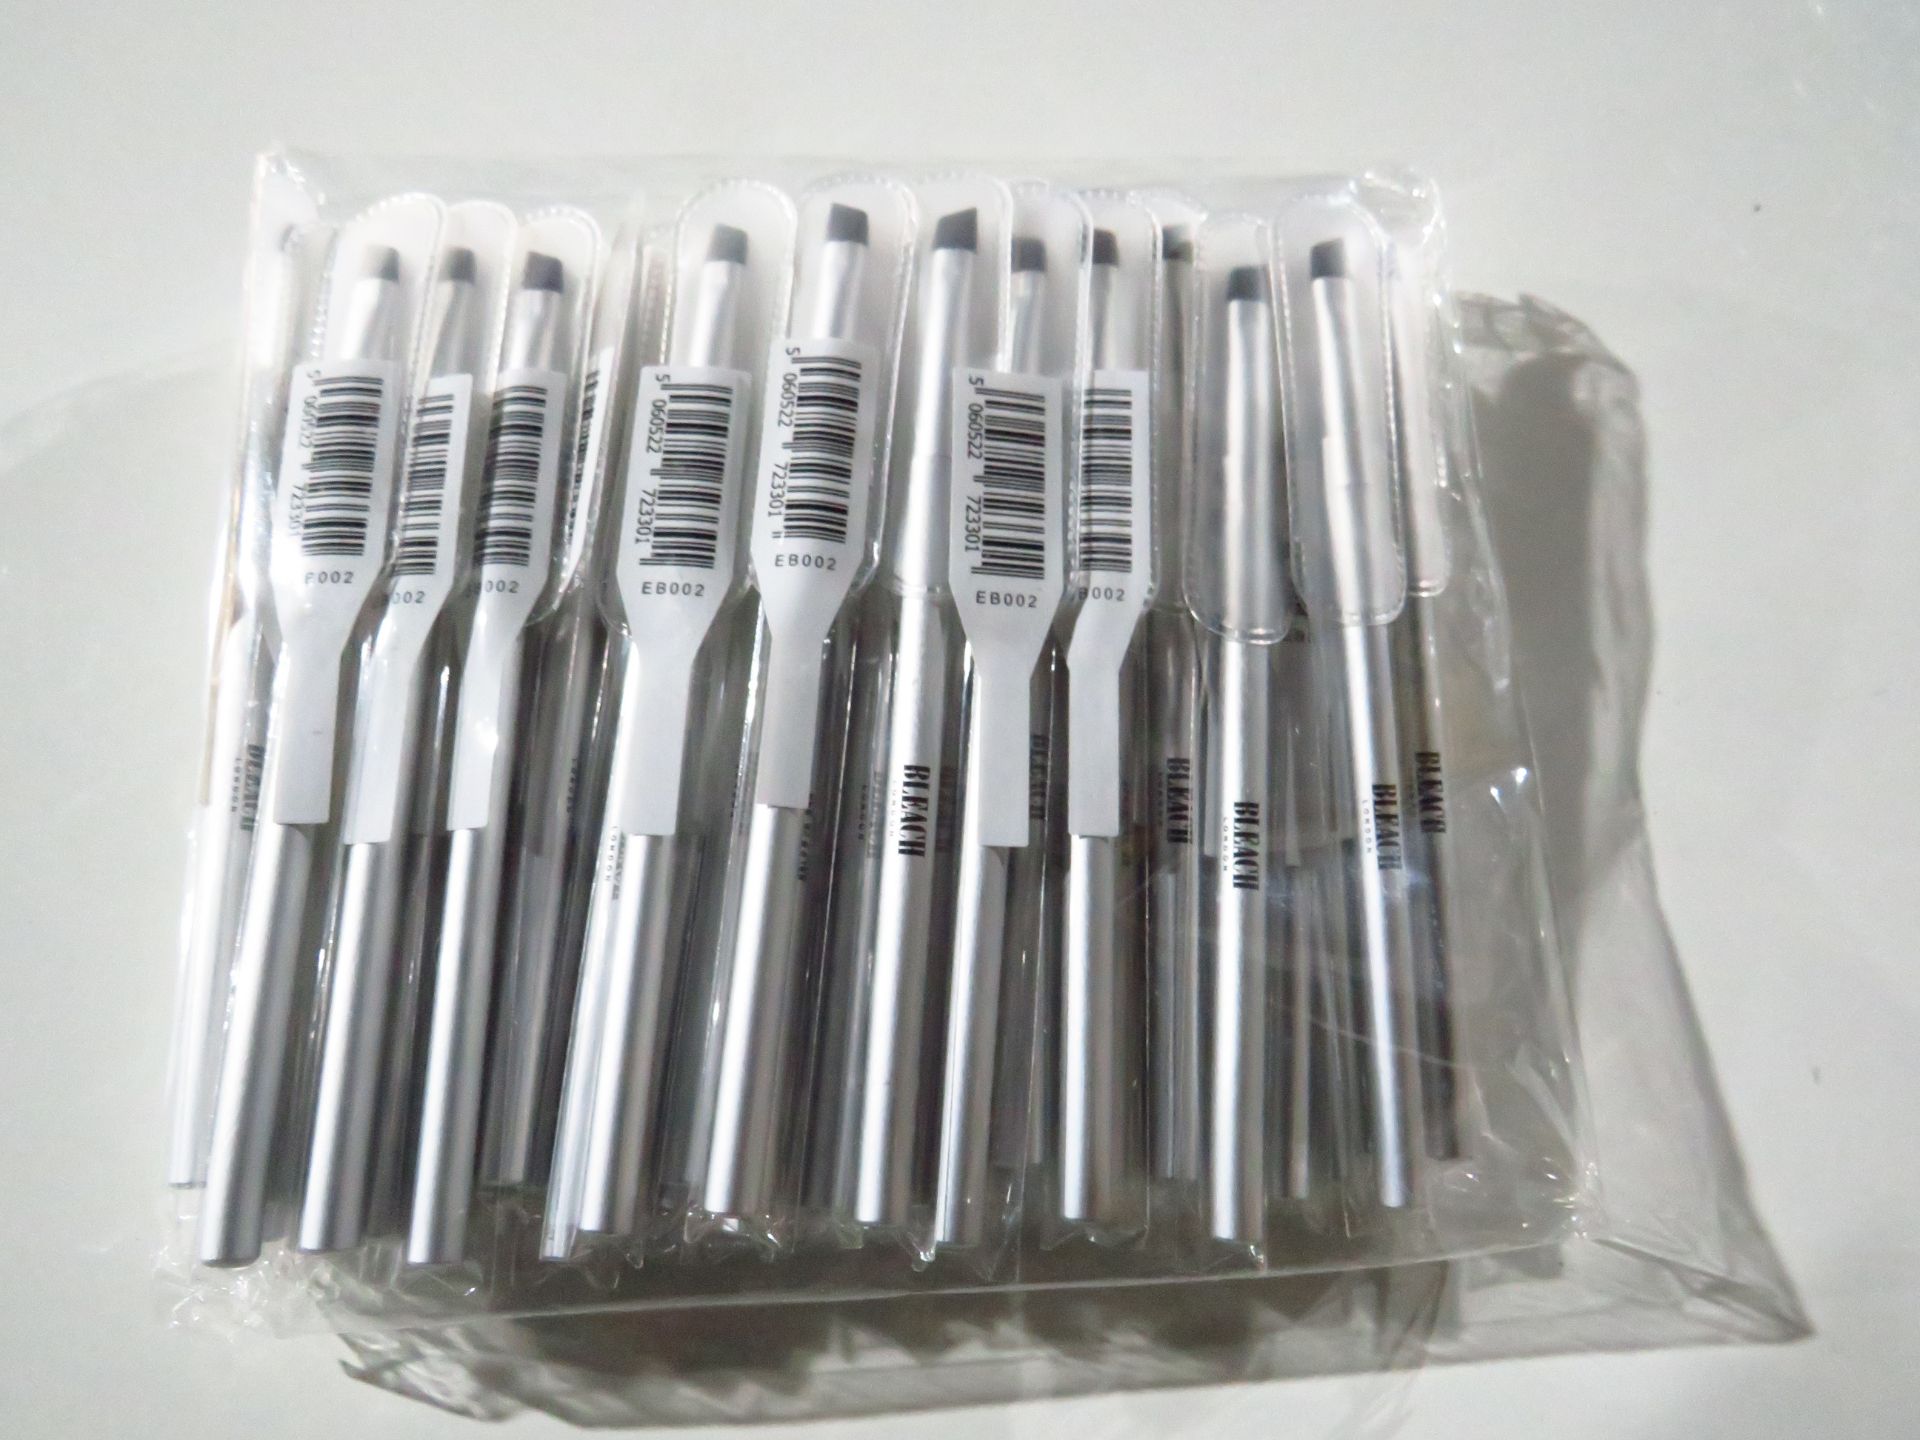 1 X PK of 50 Bleach London Lip Brushes All New & Packaged